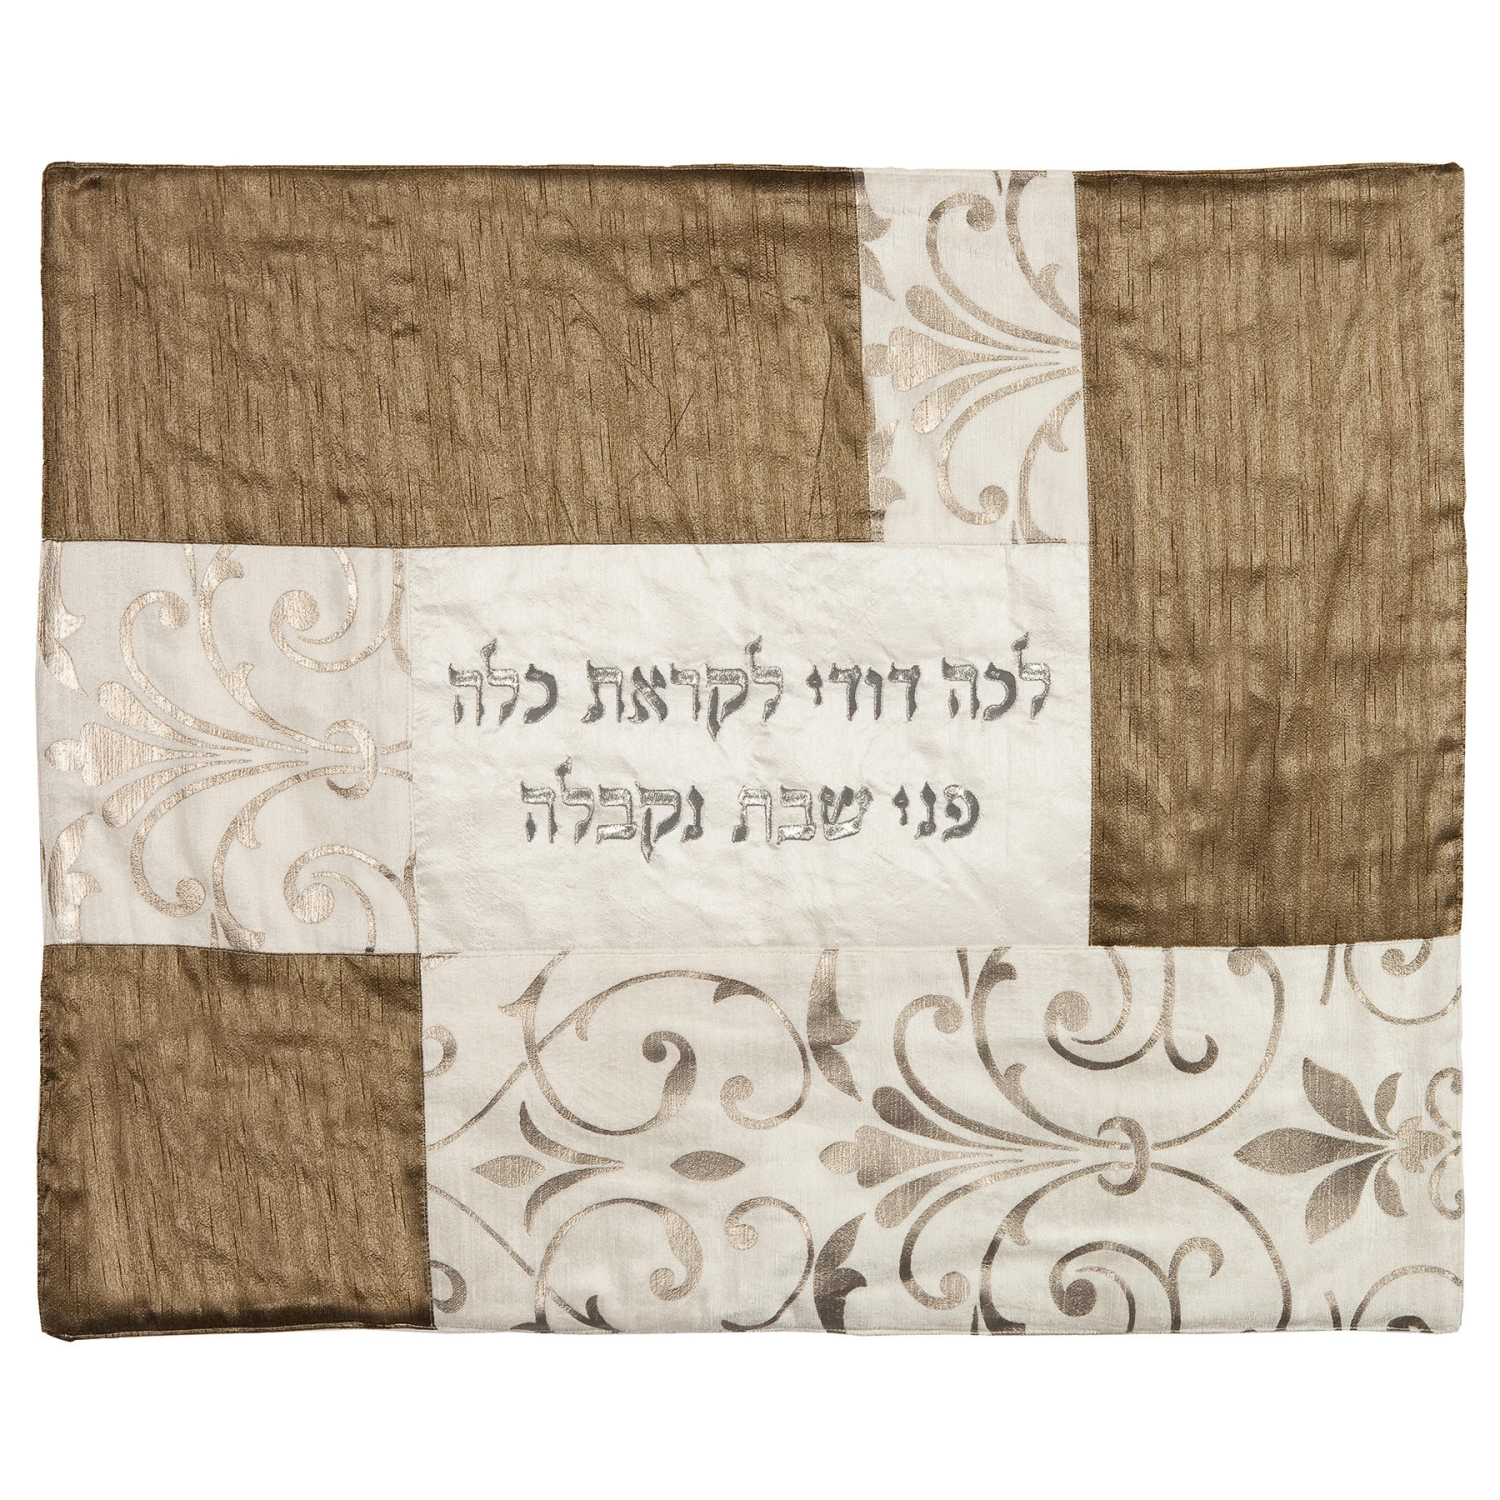 Yair Emanuel Embroidered Plata Cover (Hot Plate Cover) - Fabric Collage - Silver Ornament - 1